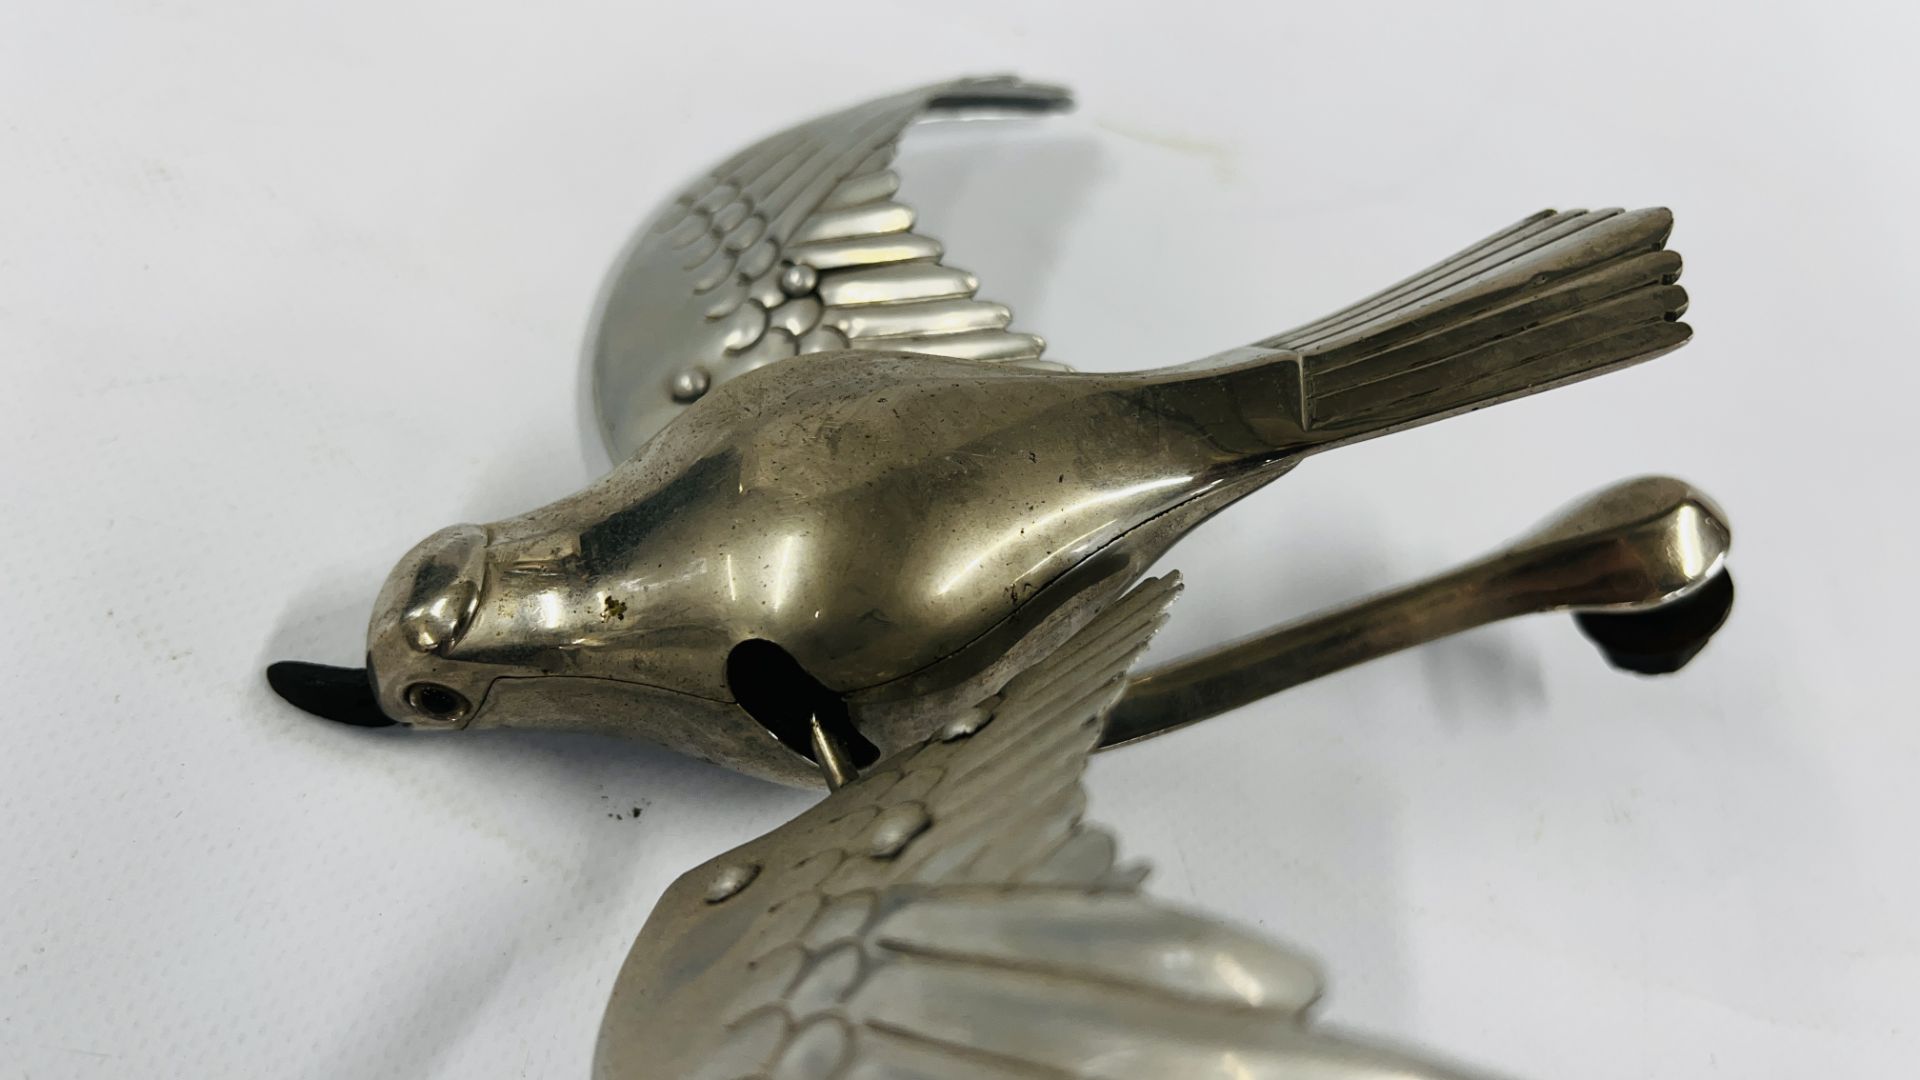 AN UNUSUAL VINTAGE FLAPPING WING BIRD CAR MASCOT (OVERALL WING SPAN 24CM). - Image 2 of 6